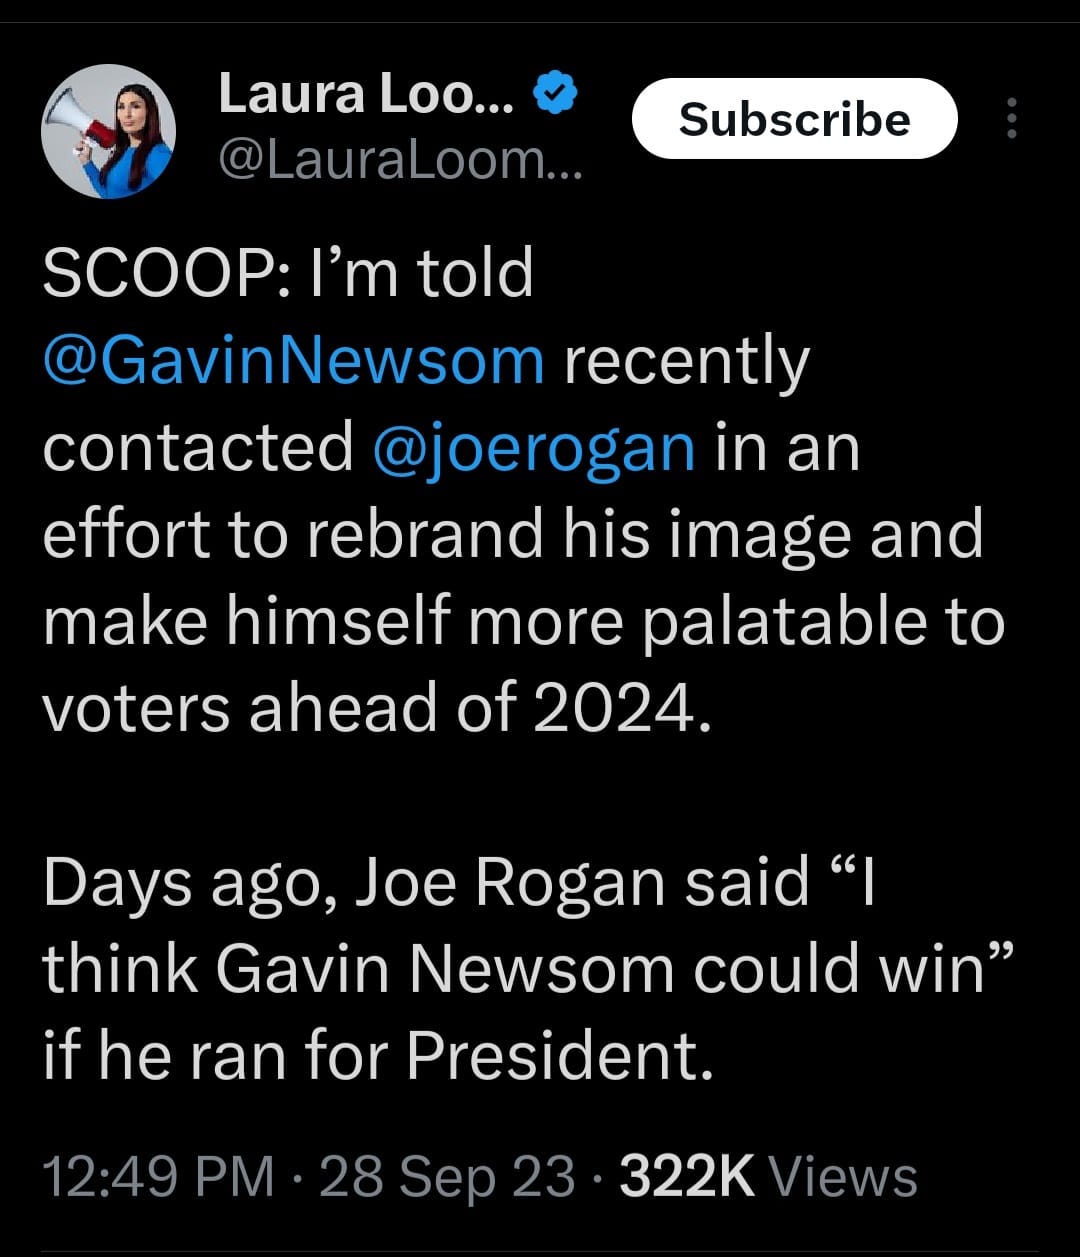 May be an image of 1 person, the Oval Office and text that says 'Laura Loo... @LauraLoom... Subscribe SCOOP:| I'm told @GavinNewsom recently contacted @joerogan in an effort to rebrand his image and make himself more palatable to voters ahead of 2024. Days ago, Joe Rogan said "I think Gavin Newsom could win" if he ran for President. 12:49 PM 28 Sep 23 322K Views'